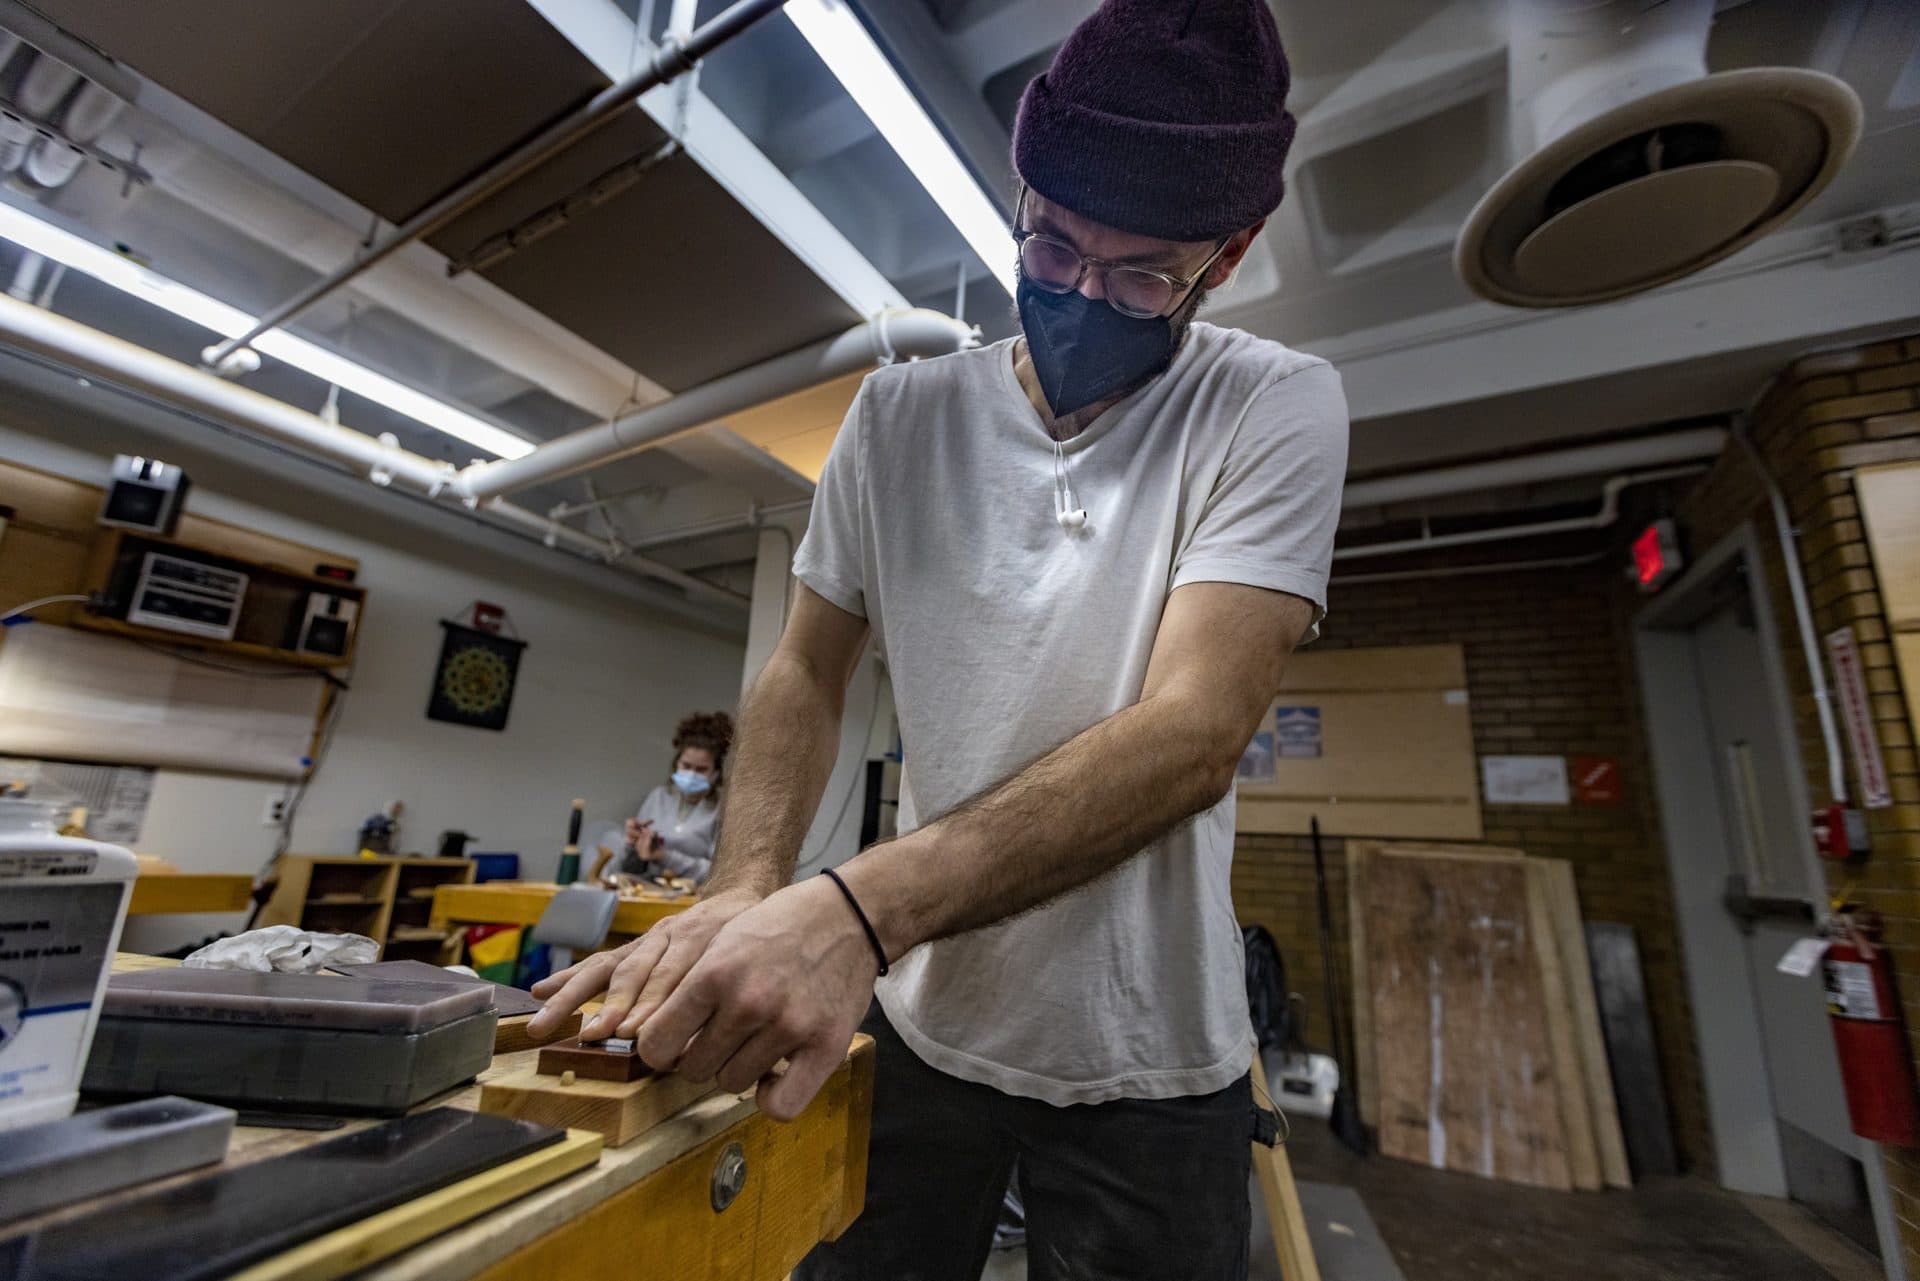 David Clarke sharpens the blade of a shoulder plane in the Bench Room at North Bennet Street School. Clarke hopes to start fresh as a woodworker after spending years in the restaurant industry, (Jesse Costa/WBUR)